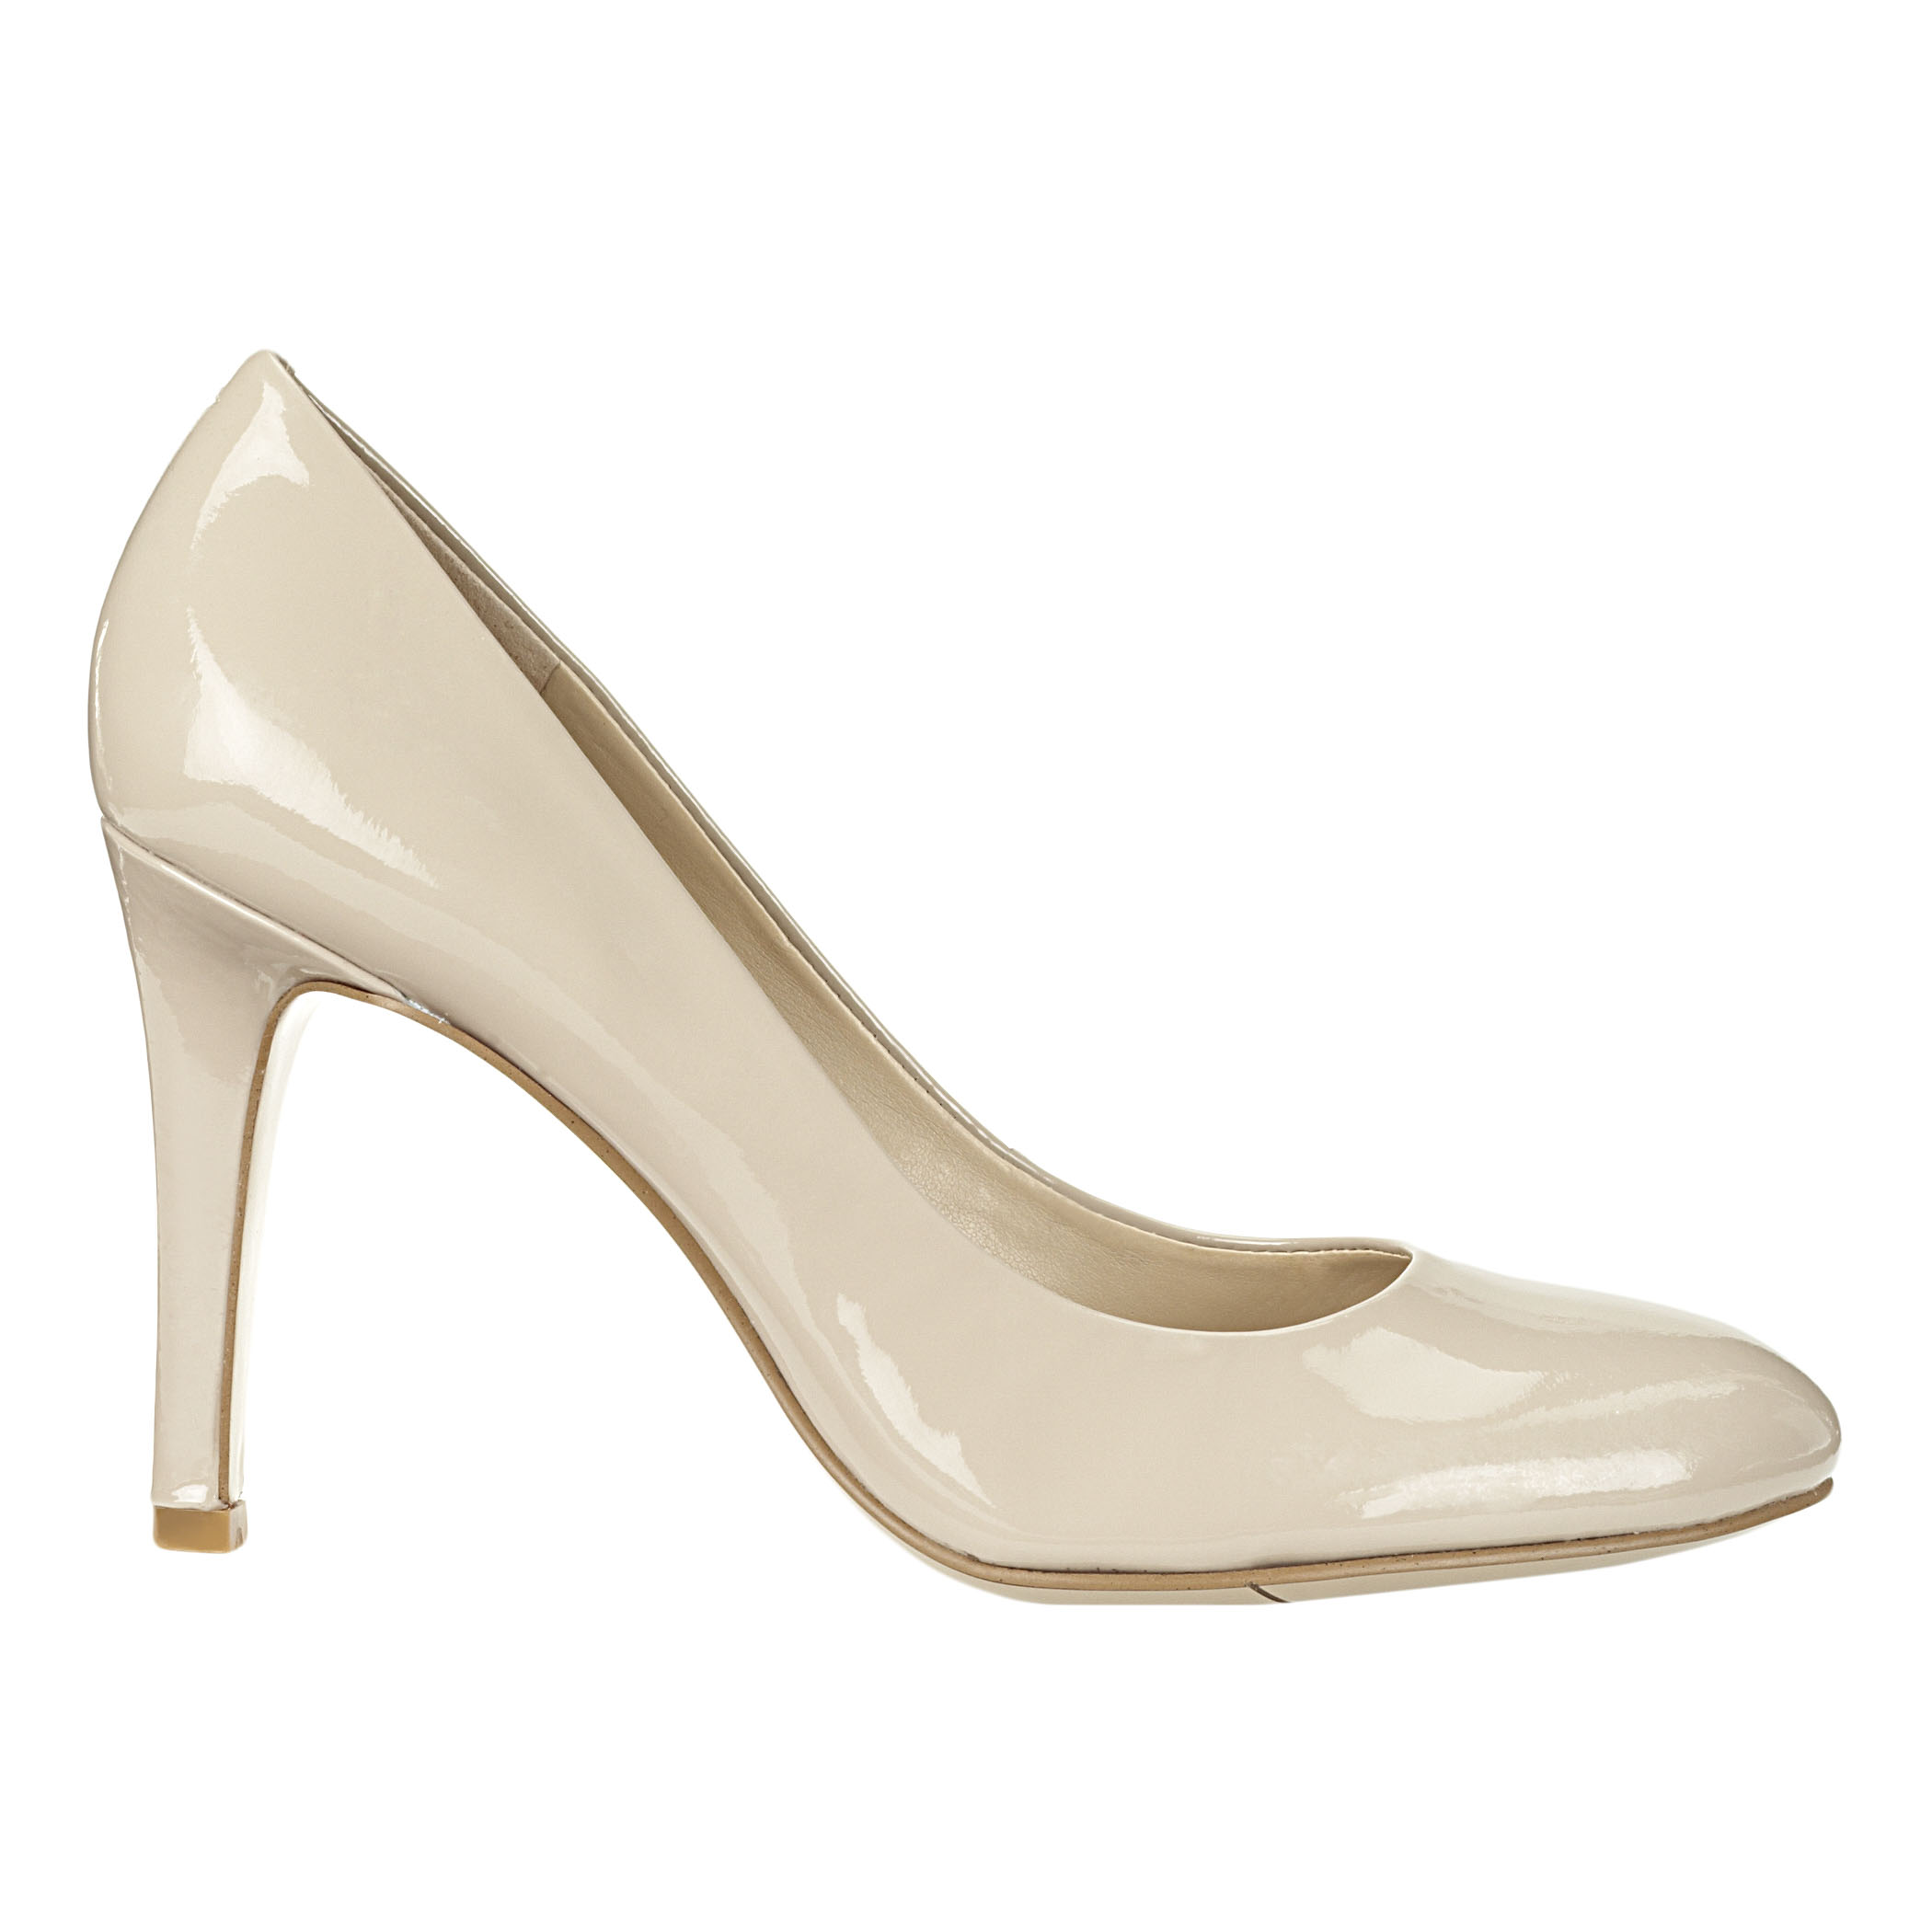 Nine West Caress Round Toe Pump in Taupe Patent Leather (White) - Lyst